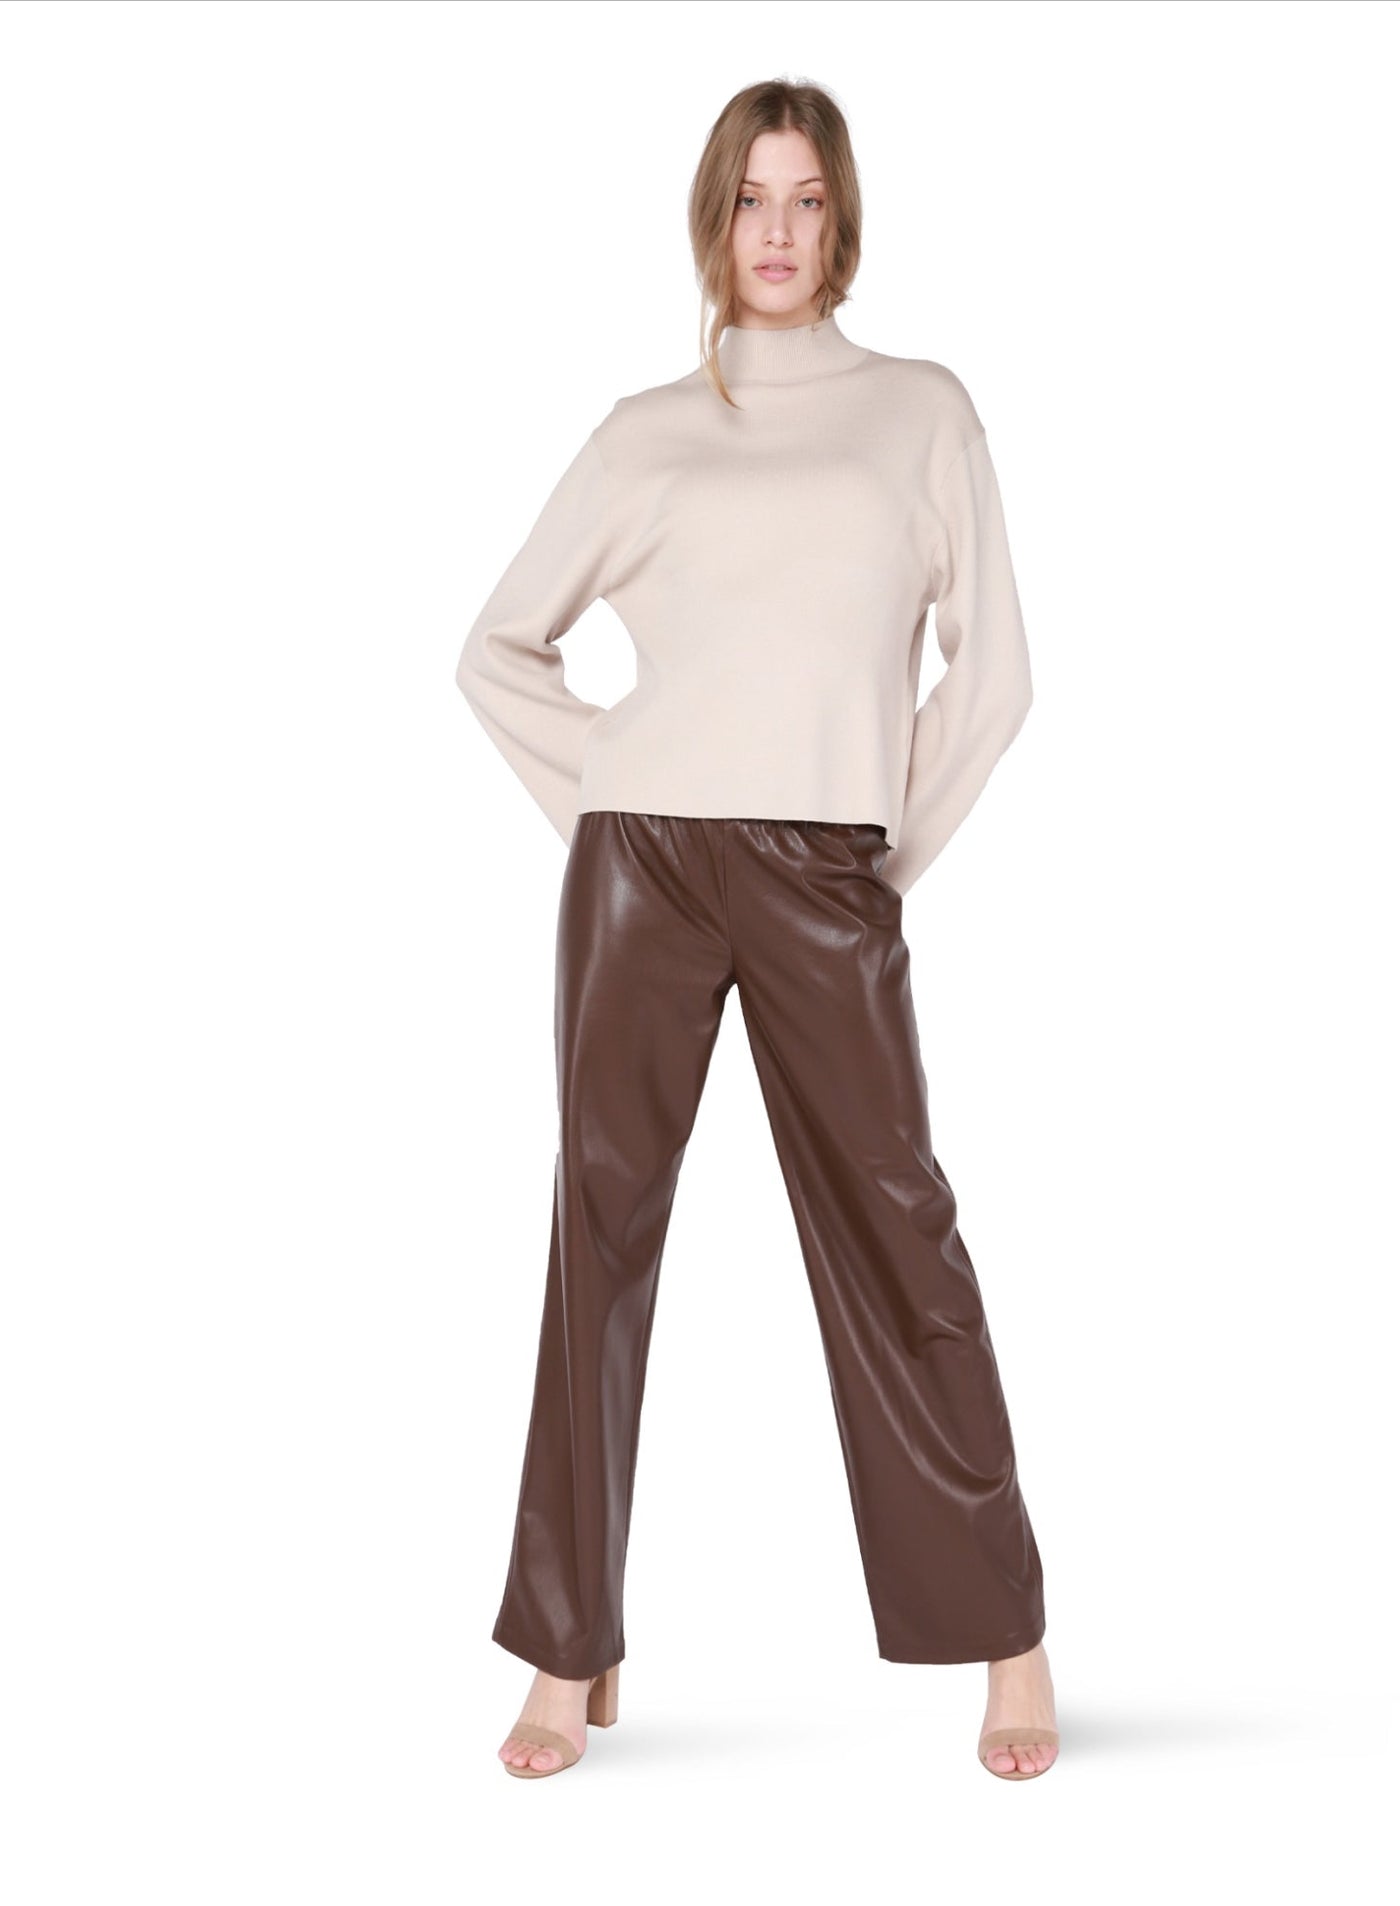 Pull on wide leg faux leather pants by Black Tape - milk chocolate brown - Blue Sky Fashions & Lingerie